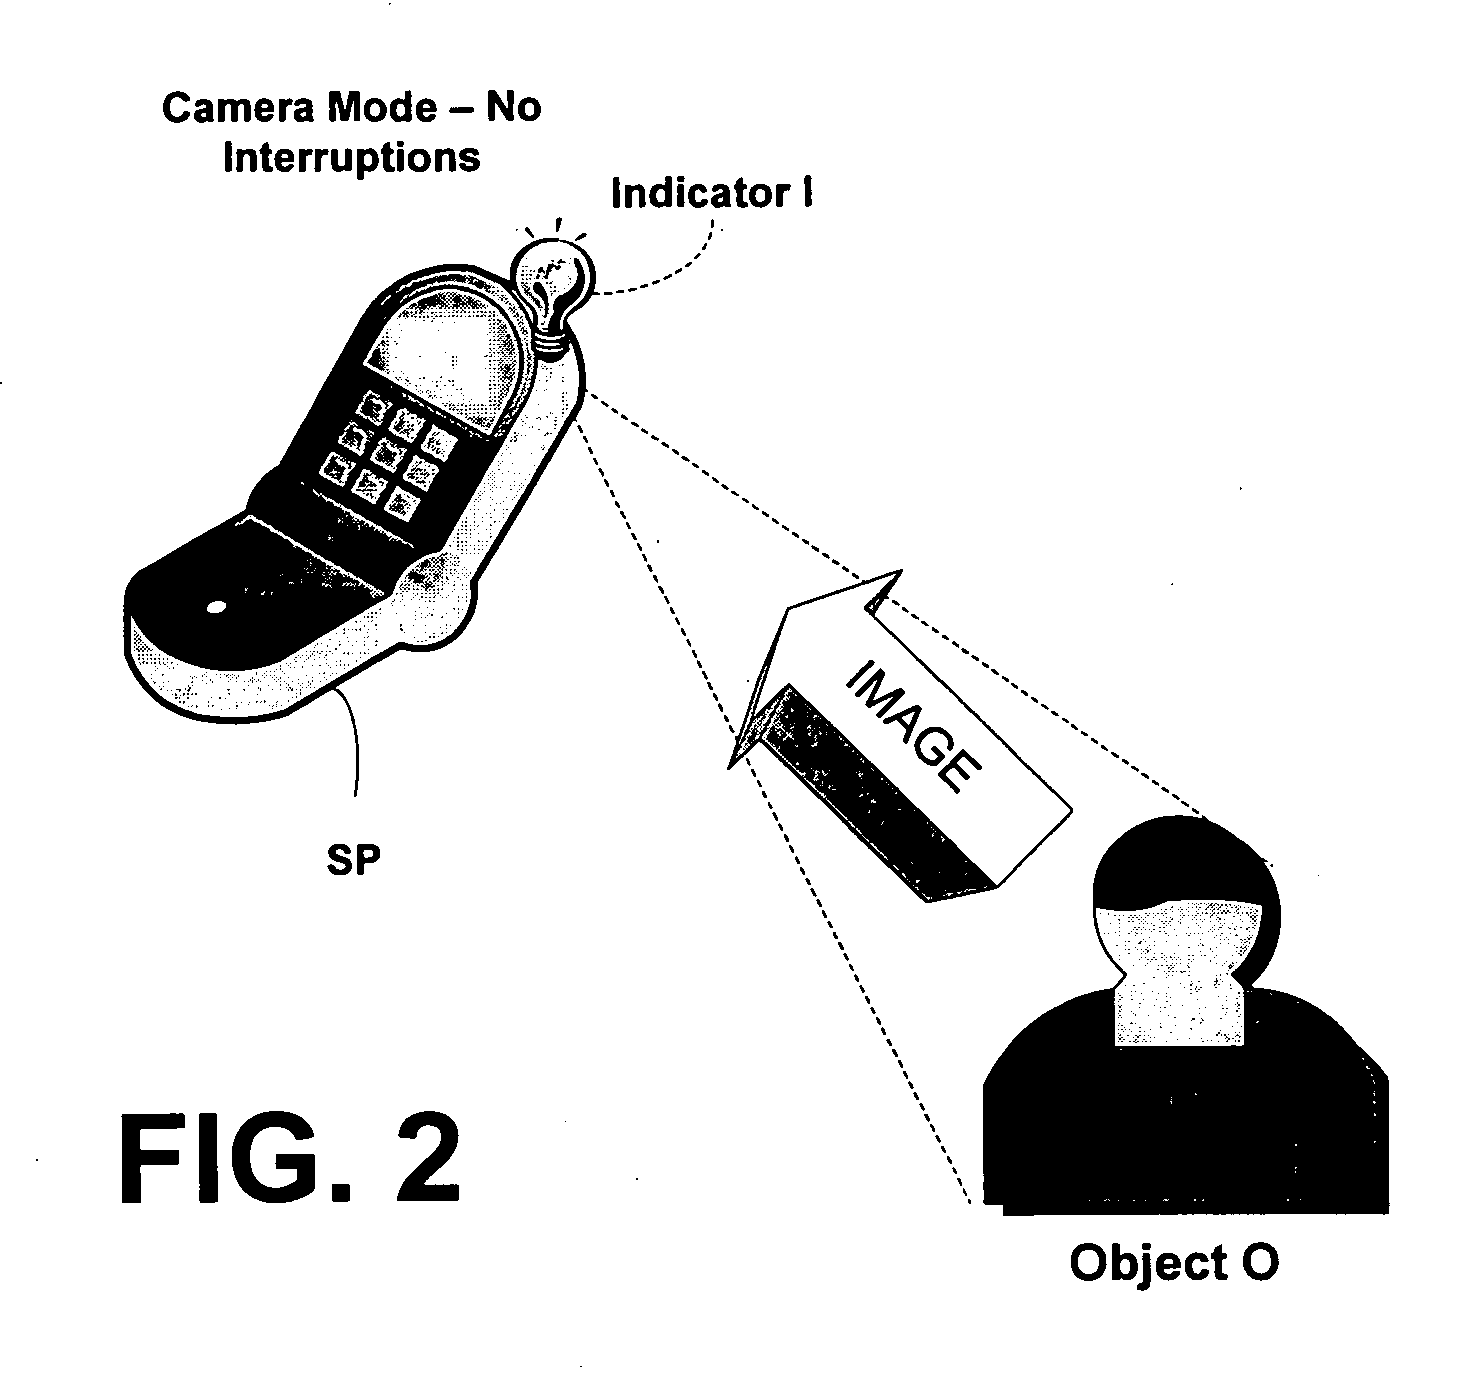 Systems and methods for operating a computing device having image capture capabilities